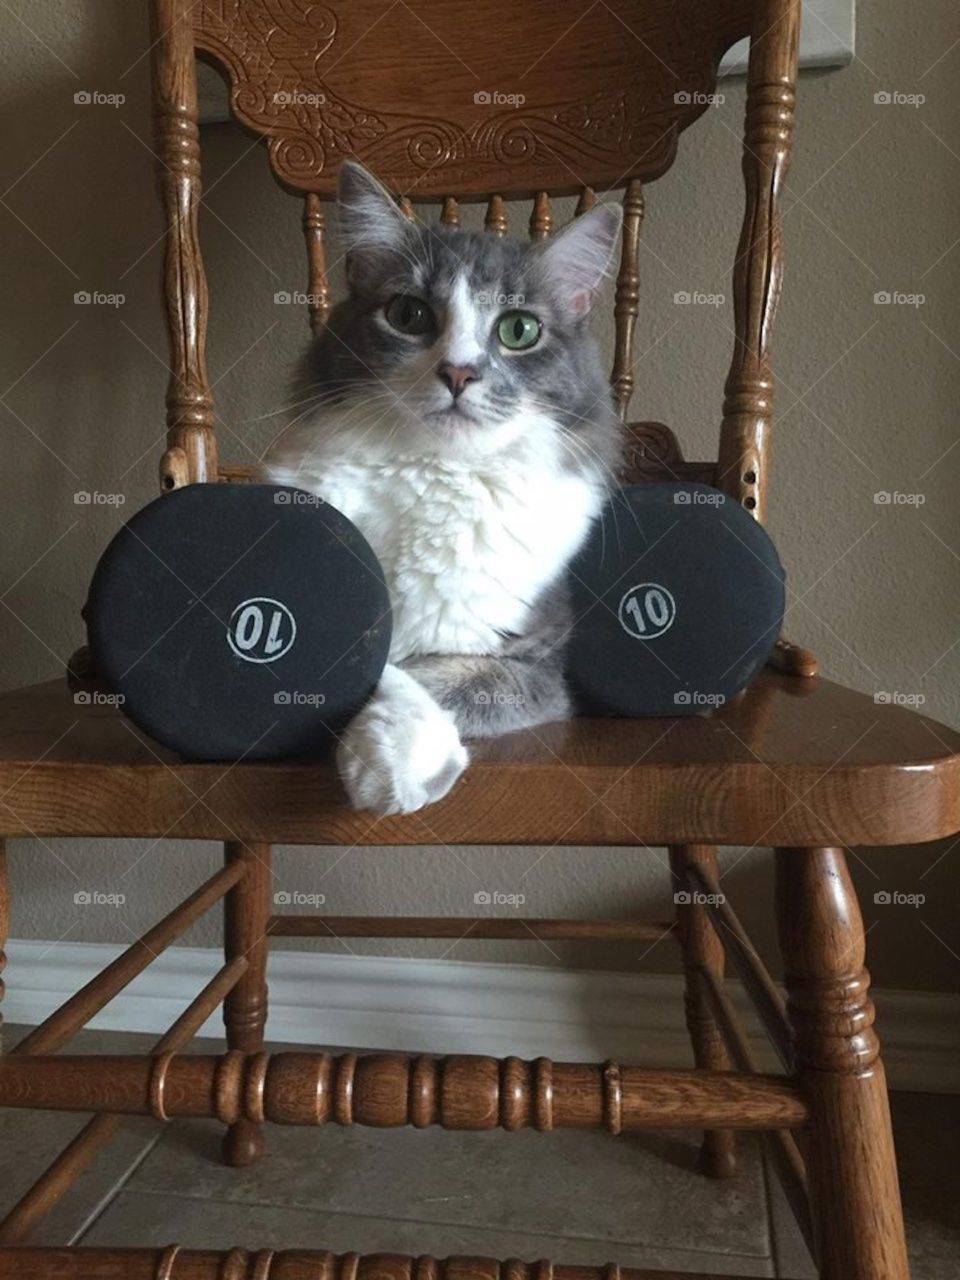 The masculine cat is telling you it is time to put down the phone and pick up the weights..err..pet him. With his soft, long hair contrasting with the slick chair and rubbery dumbbells, a variety of textures and neutral colors aid visual interest.